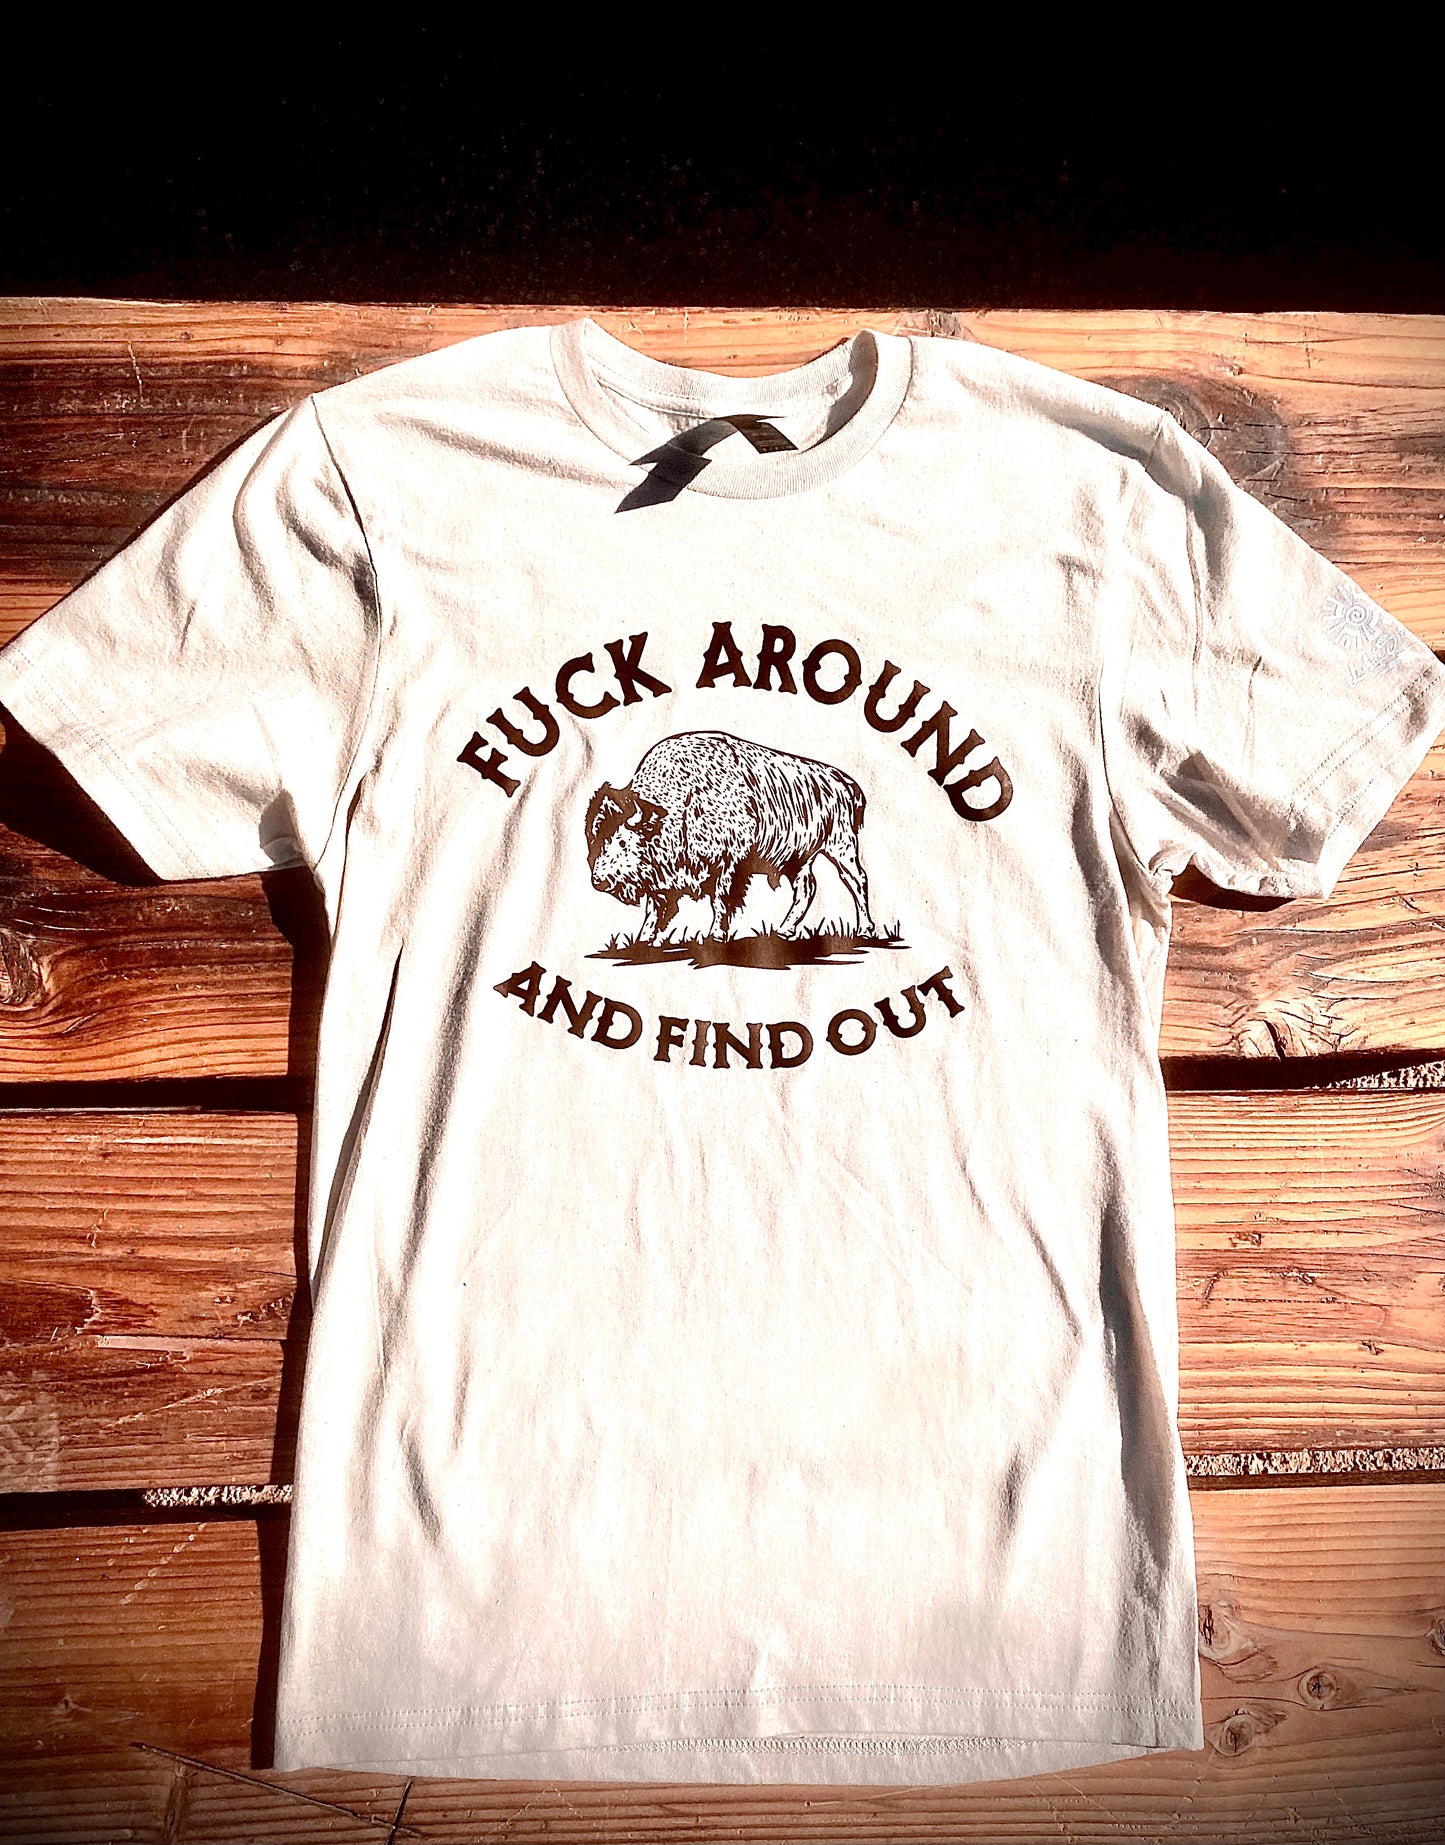 Fuck Around and Find Out T-shirt